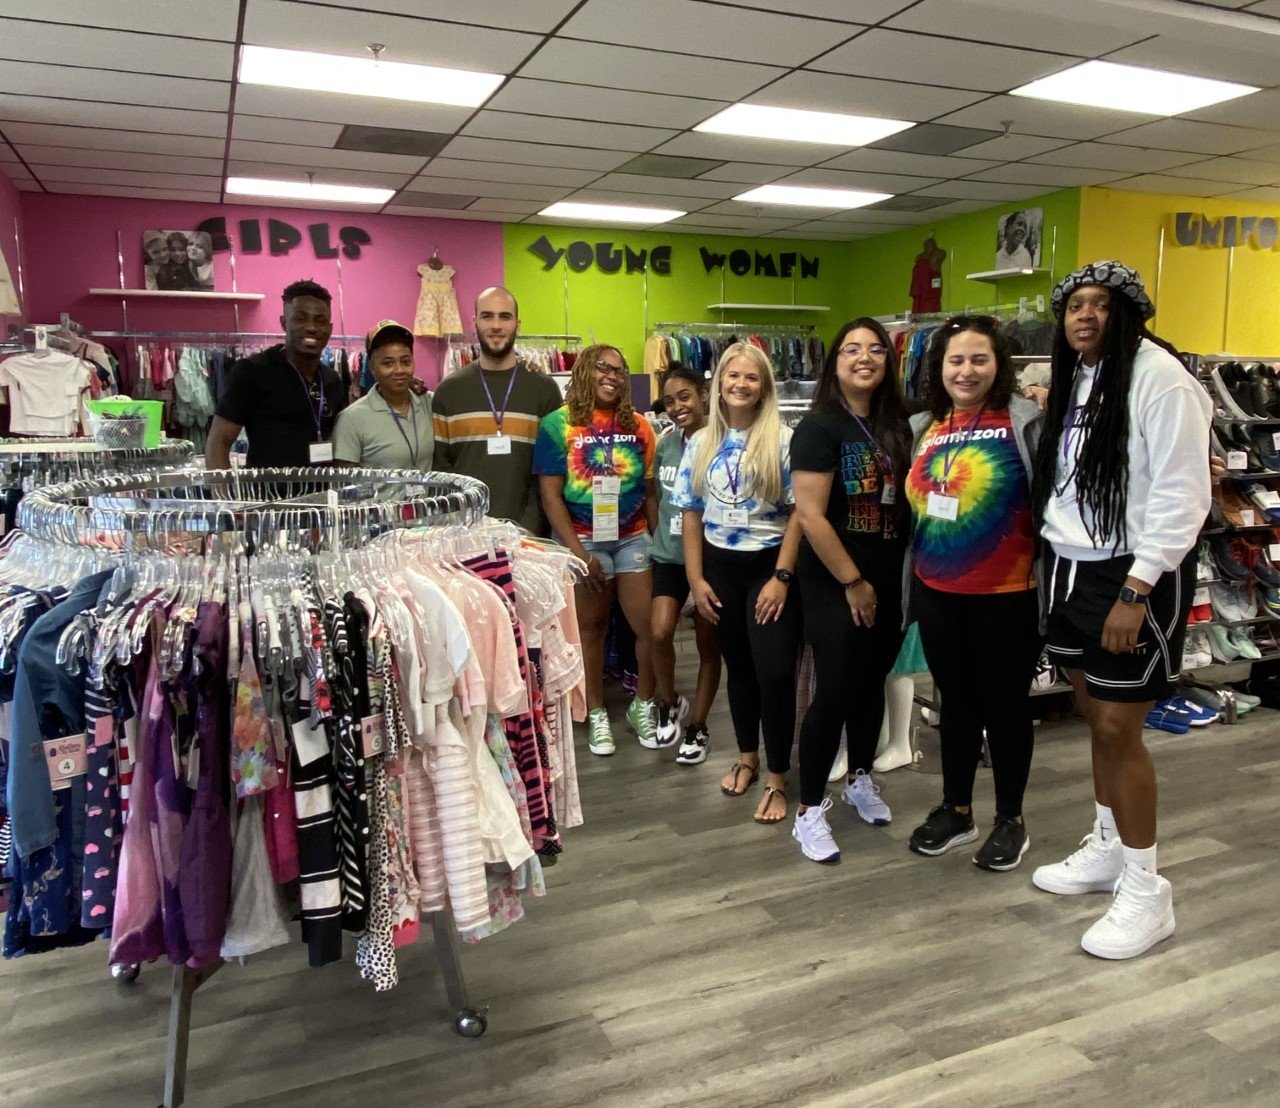 Best New and Used Junior & Teen Girls Clothing near Pensacola, FL